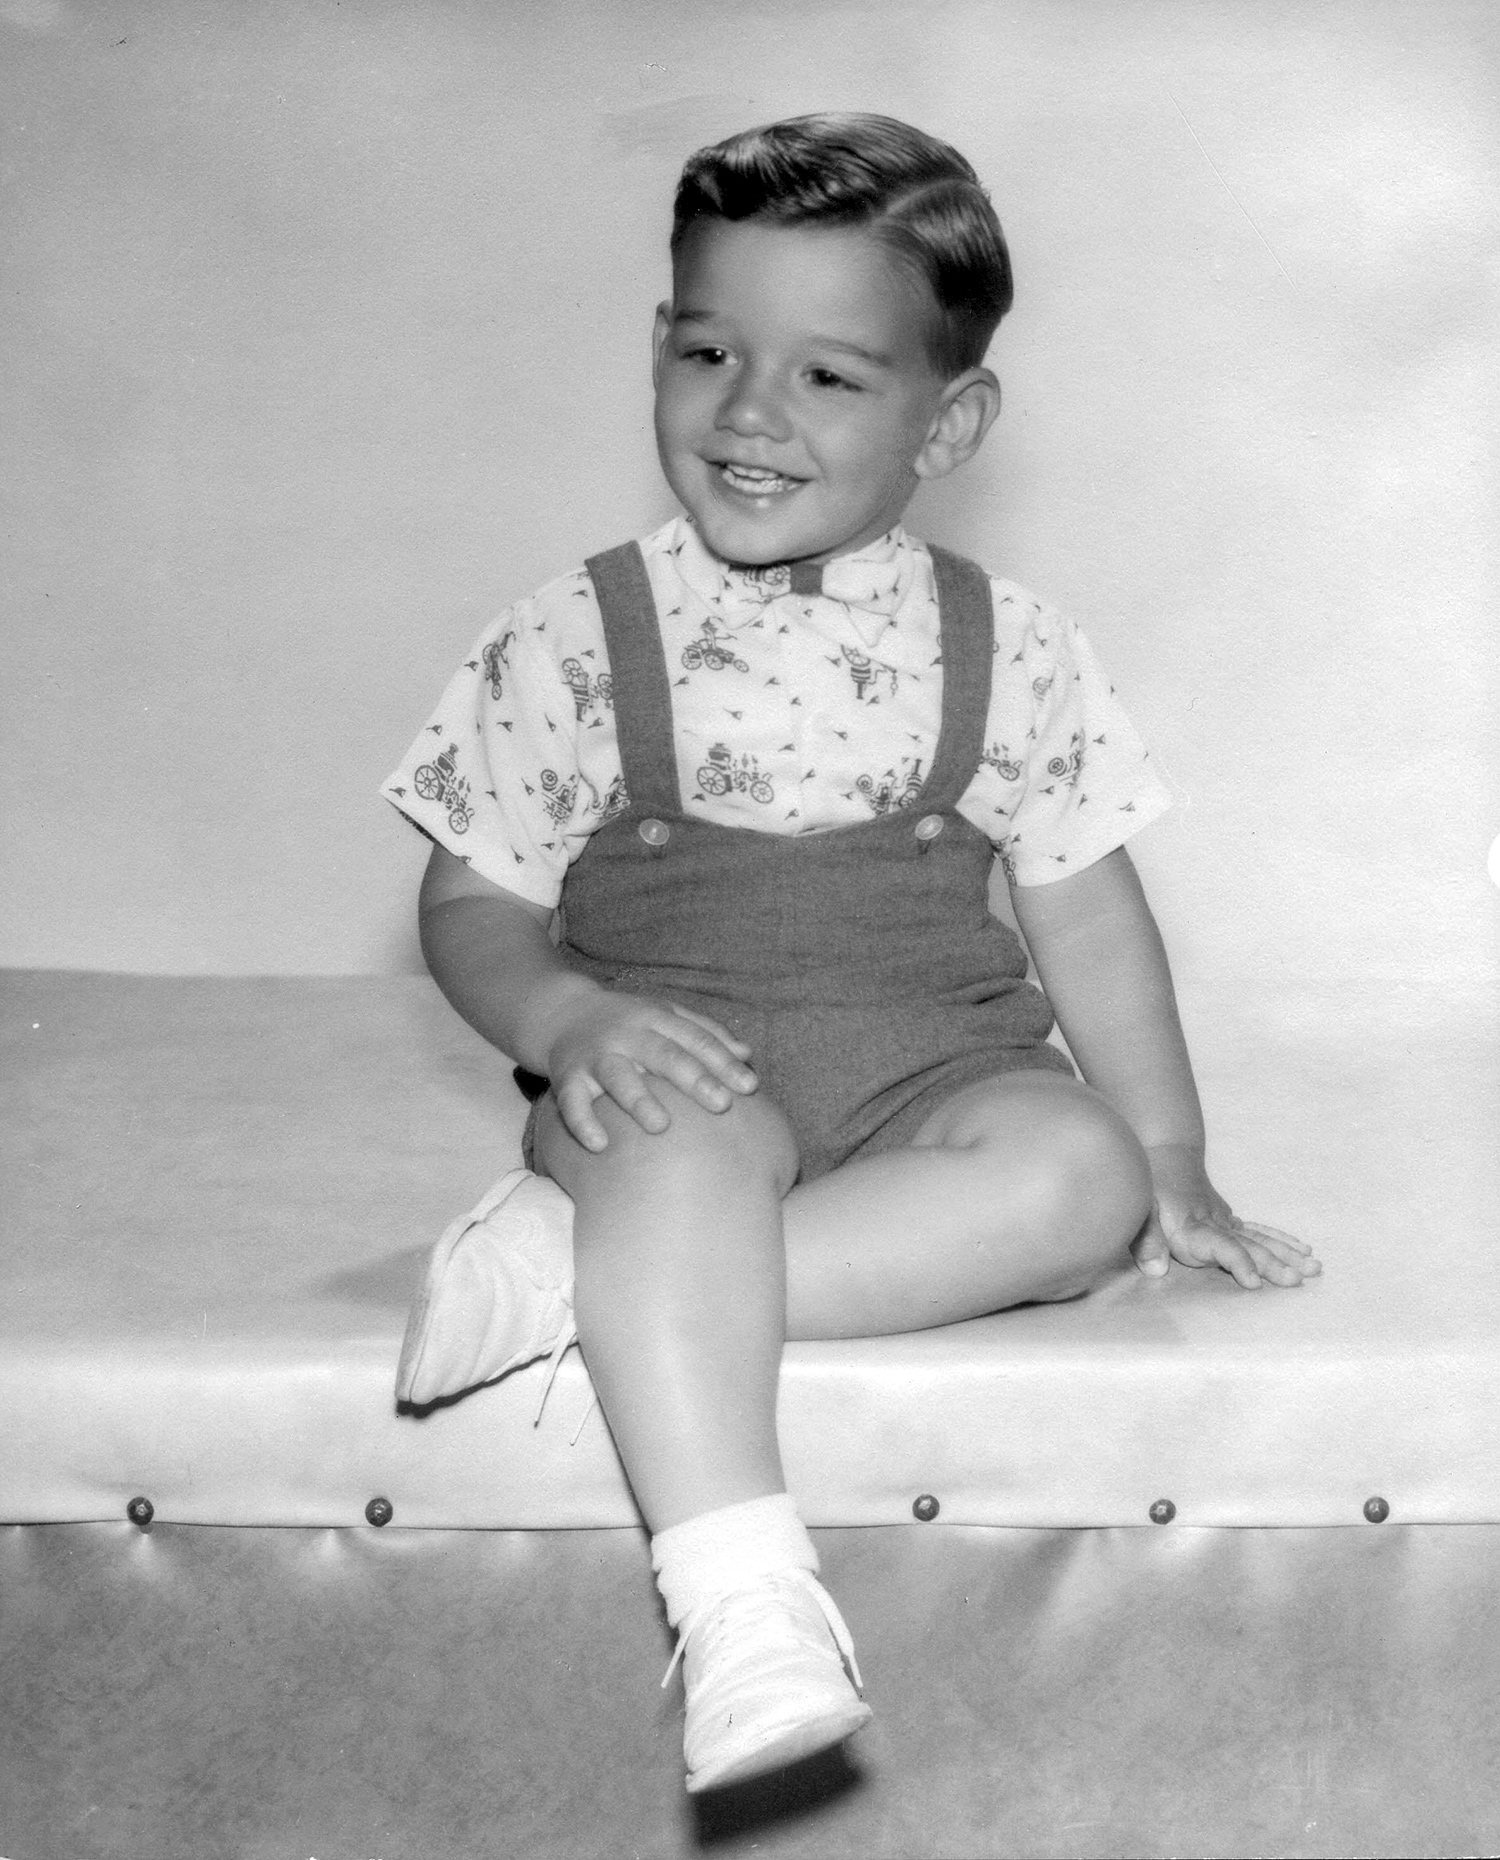 Age three Marty Rothblatt in 1957, wearing suspenders, happy posed in photo studio, black and white.